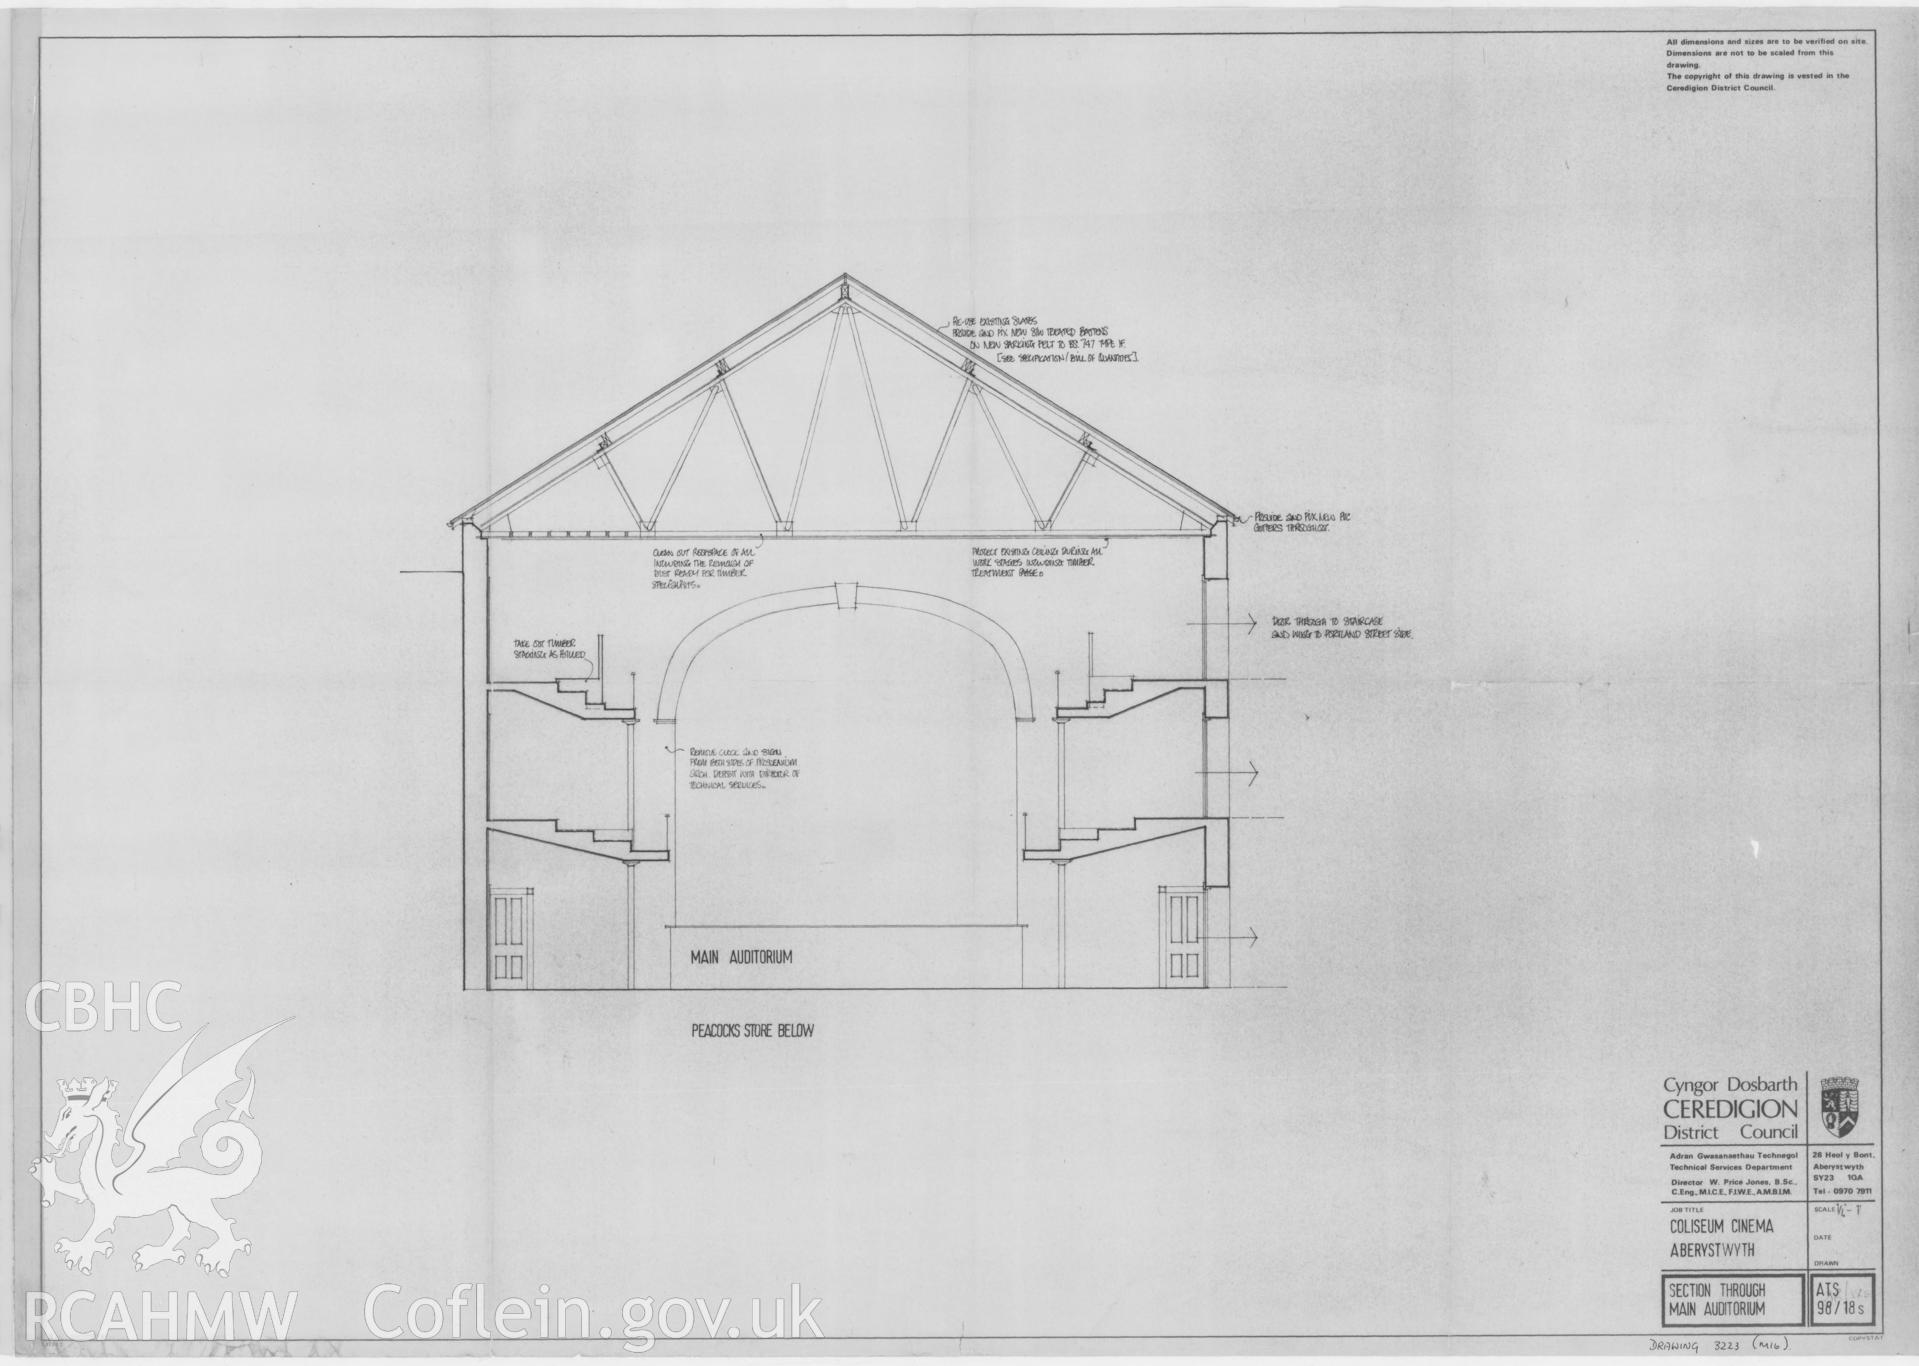 Copy of a non RCAHMW drawing showing section thro auditorium at Coliseum Cinema, Aberystwyth, received in the course of threatened buildings case ref no M/DES/B/CD/79/01